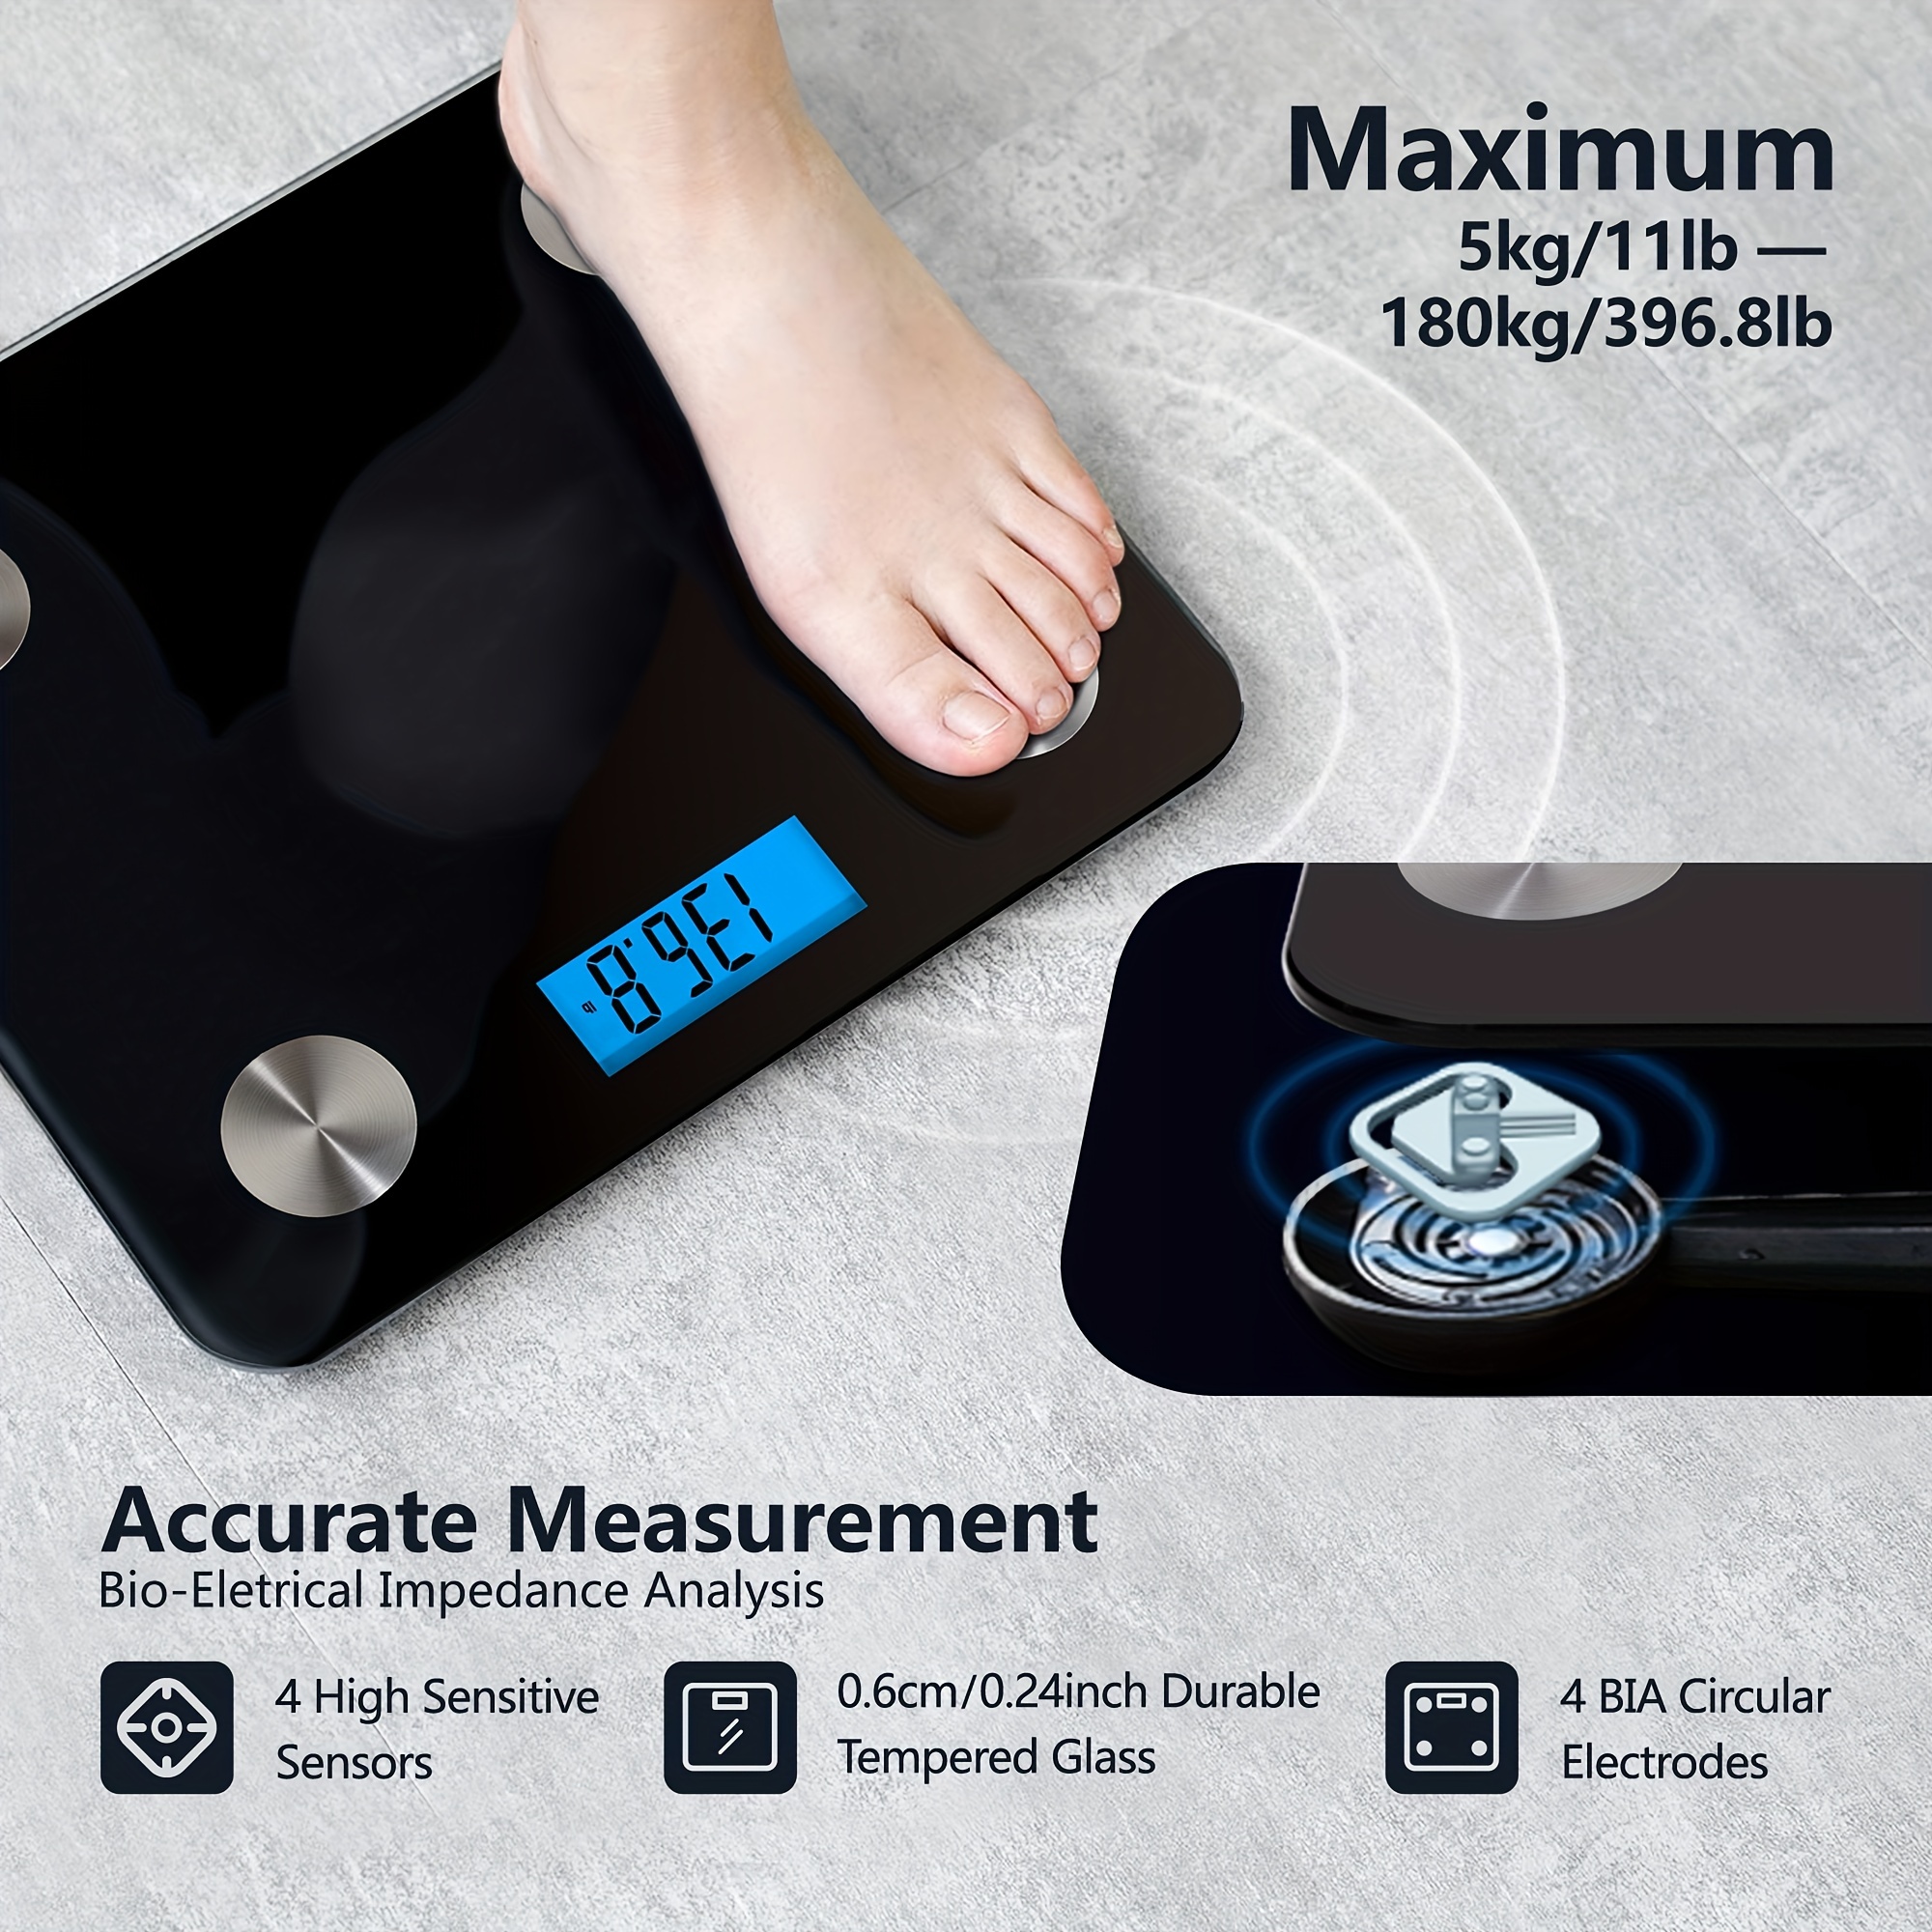 Measure Body Fat & Muscle Mass at Home